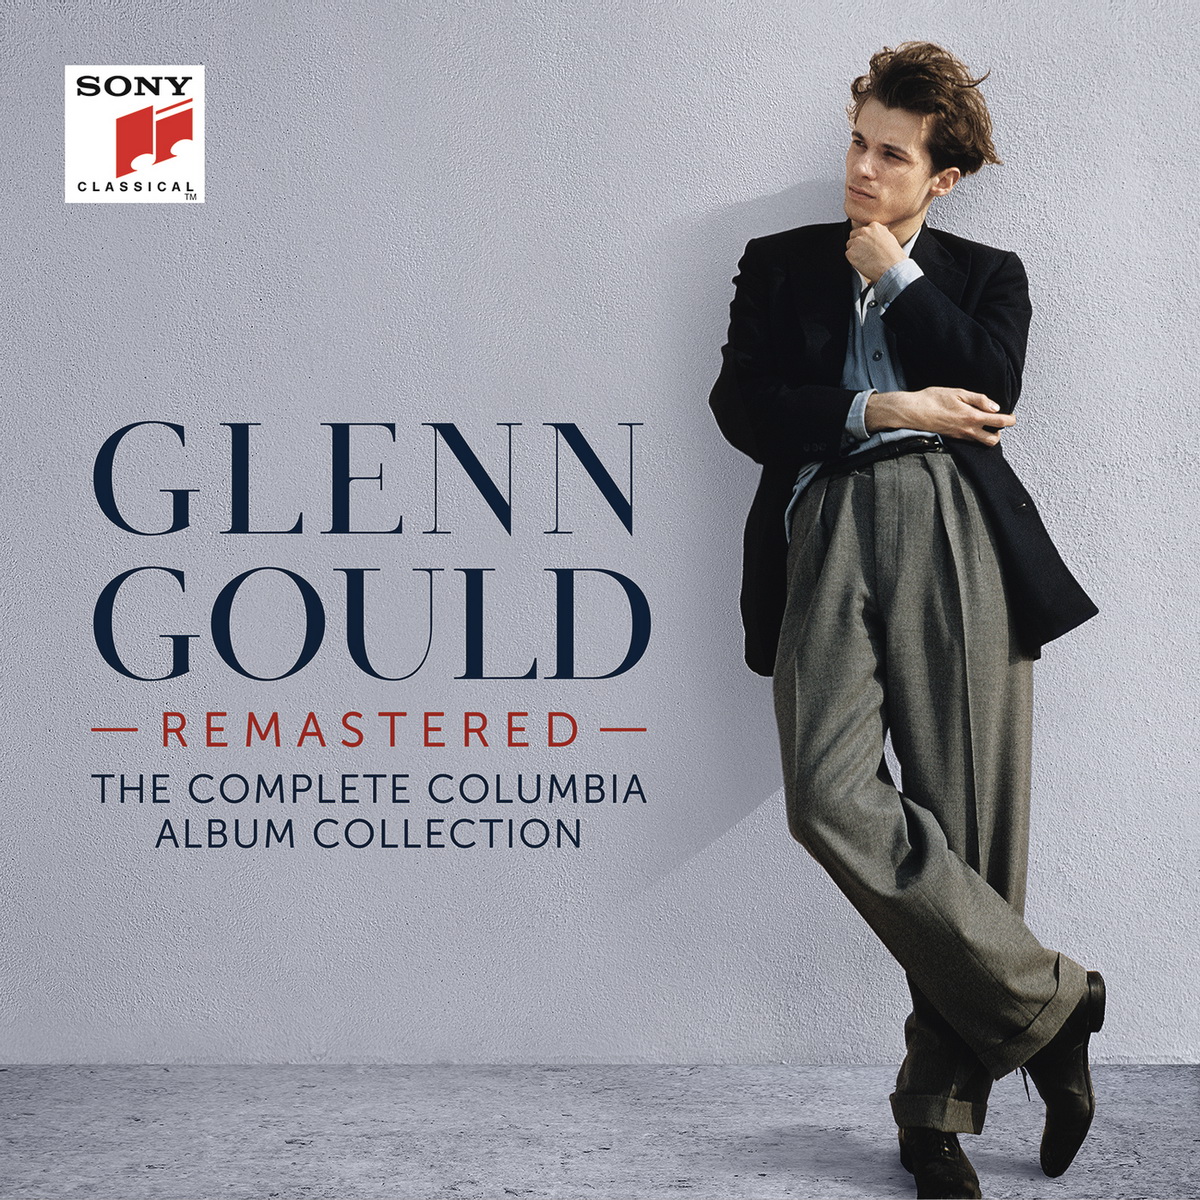 Glenn Gould - The Complete Columbia Album Collection (2015 Remastered Edition) [Qobuz FLAC 24bit/44,1kHz]